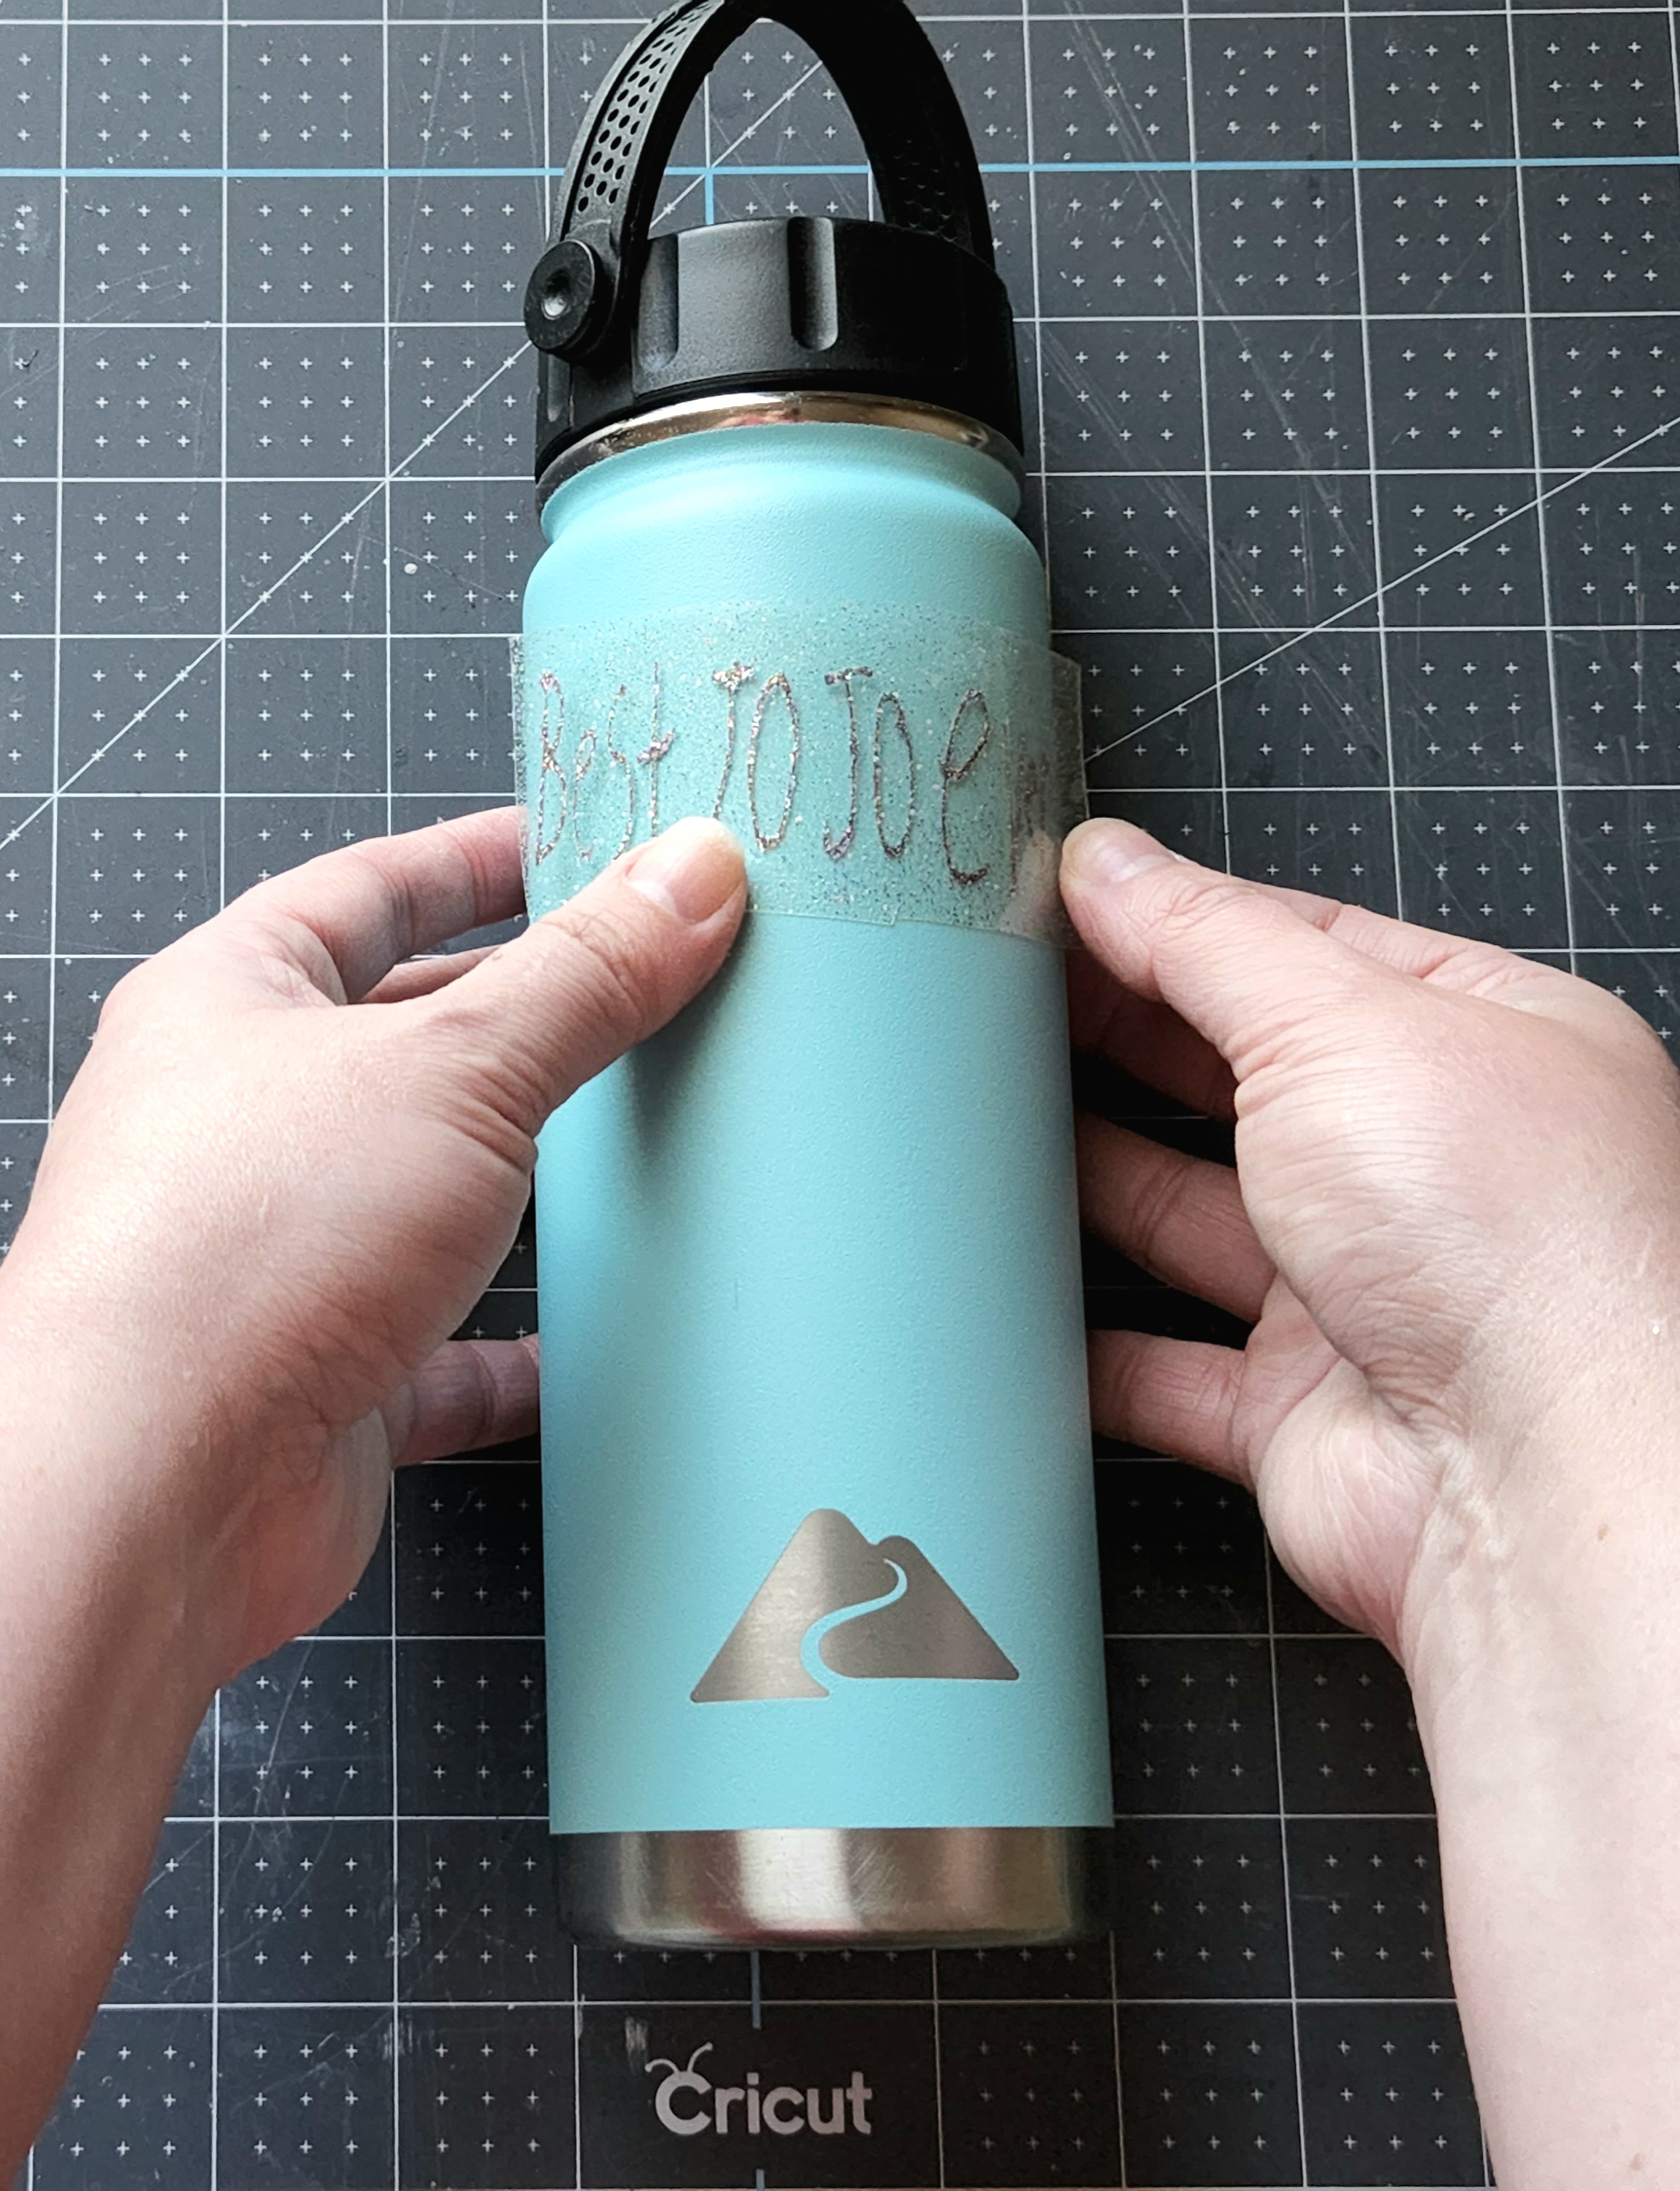 Placing a childs handwriting on the tumbler after cutting it with a Cricut.